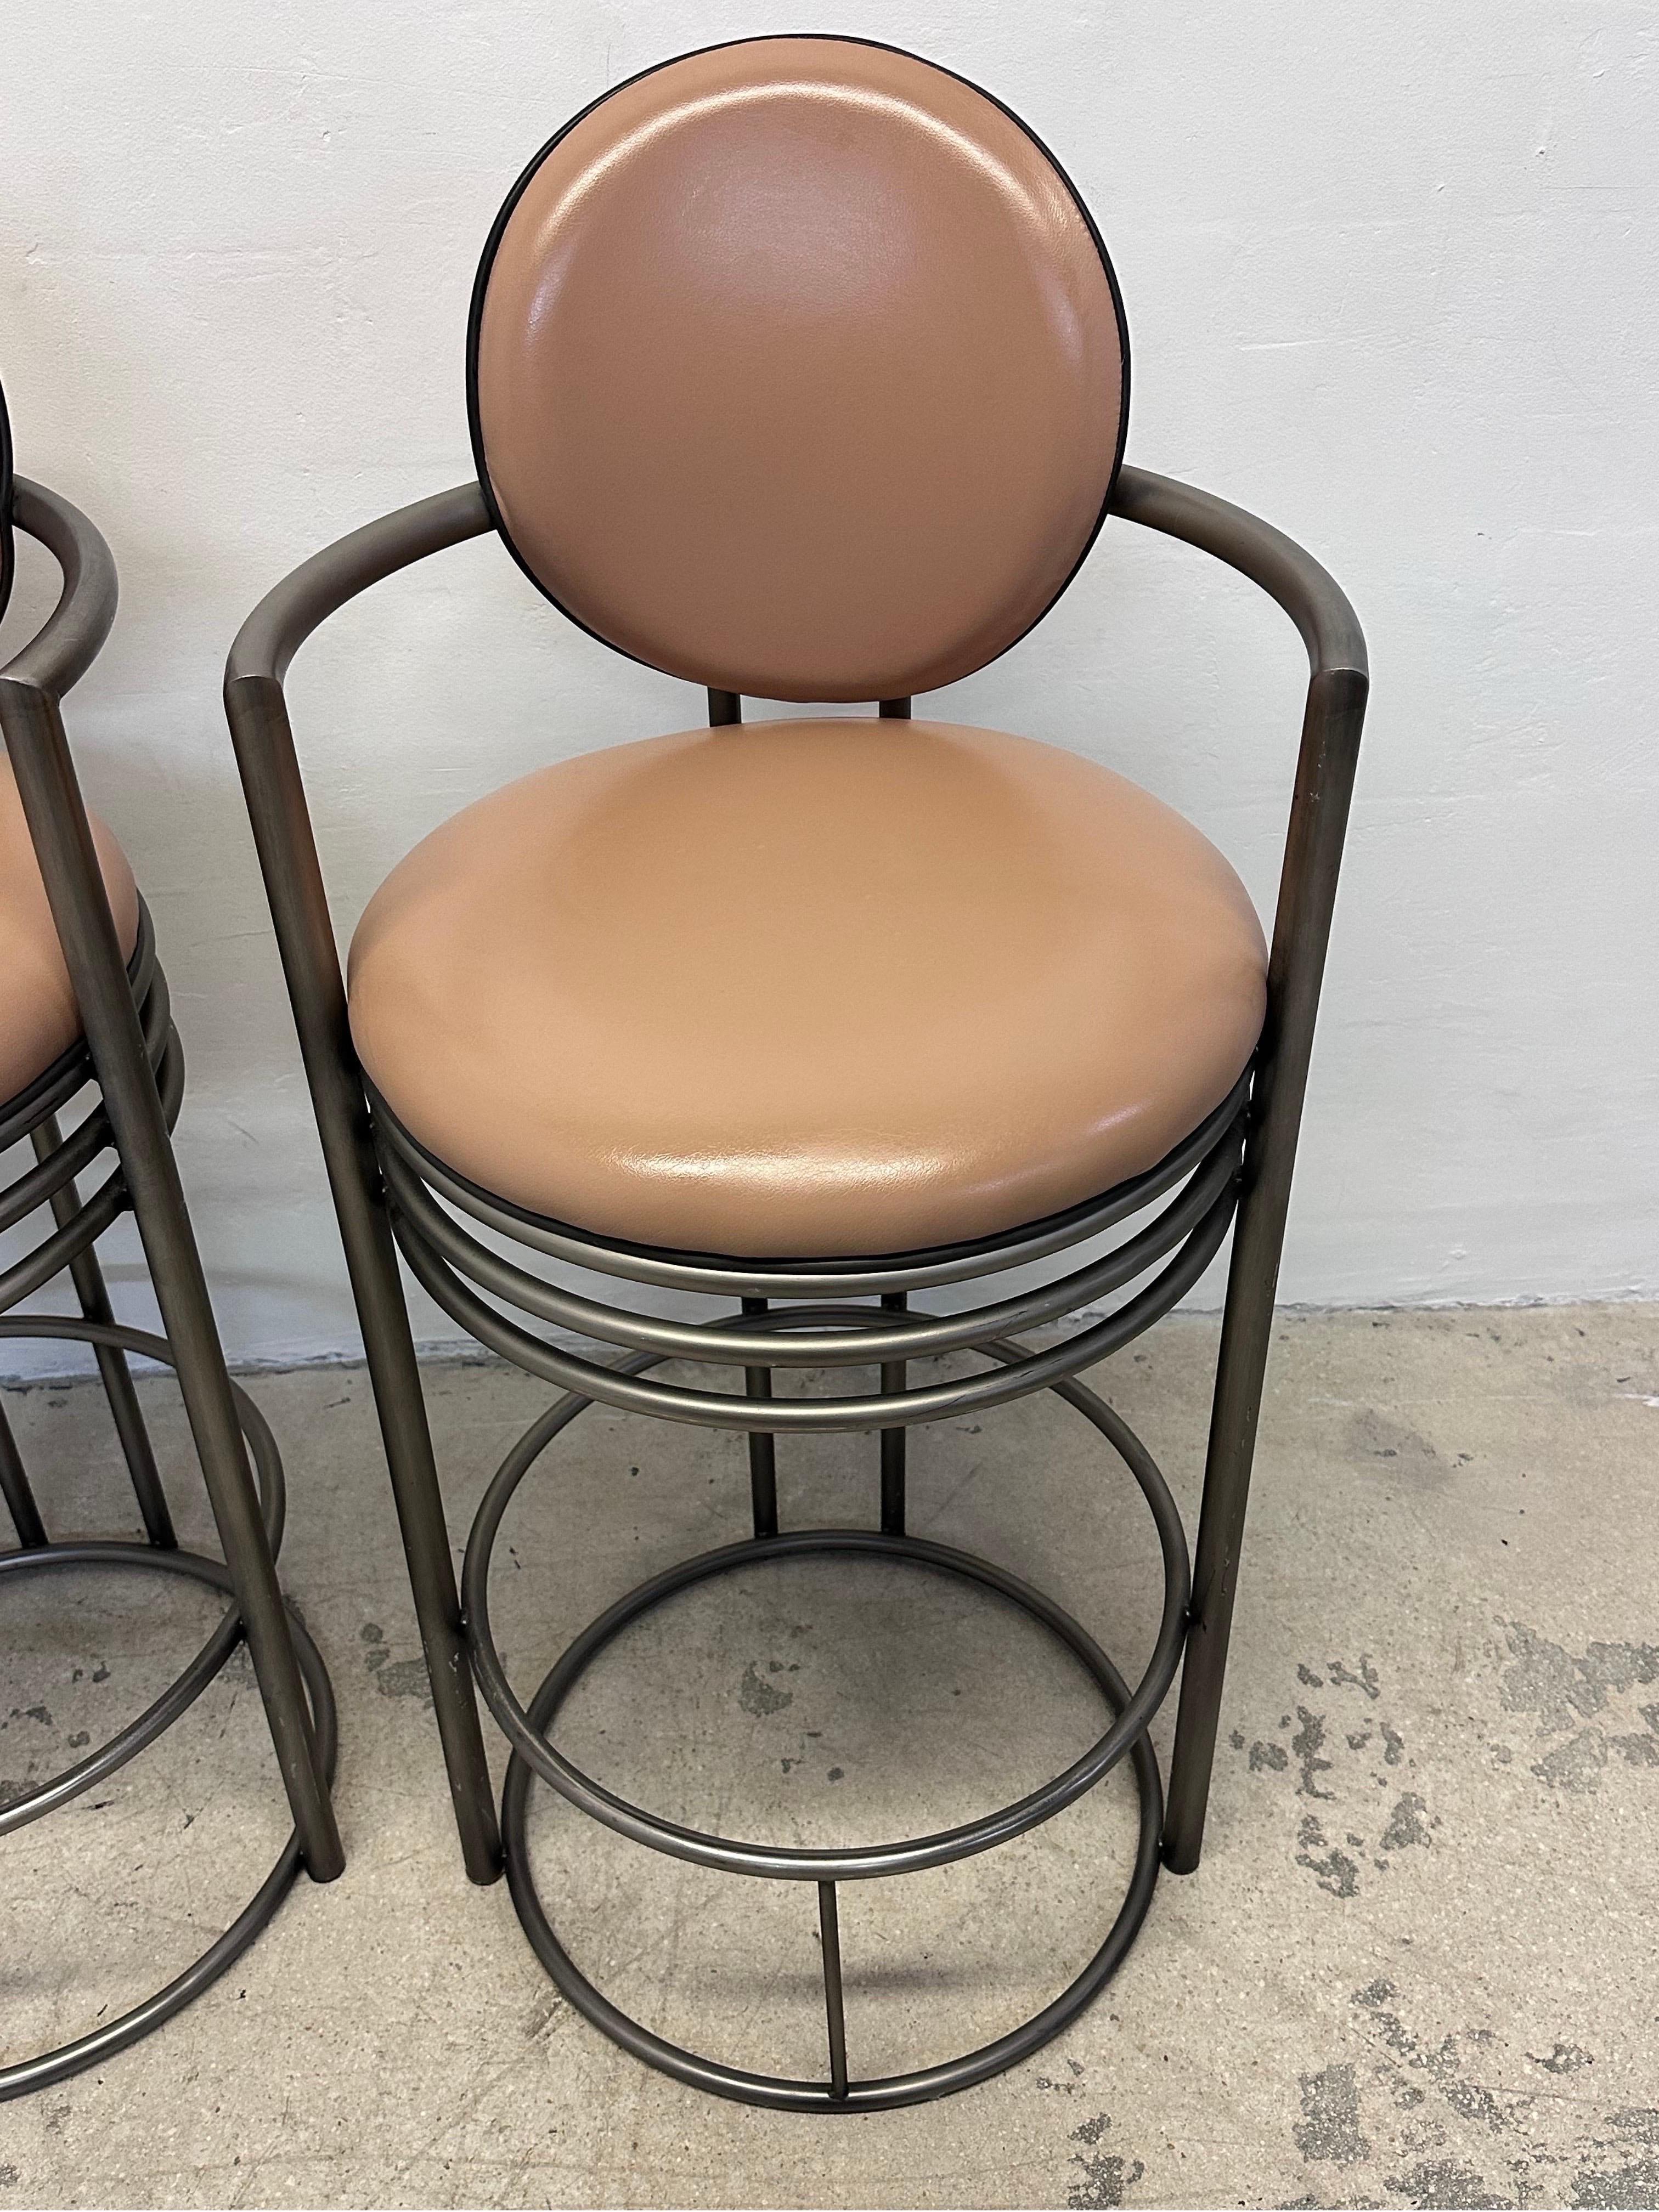 Design Institute America Deco Revival Bar Stools With Arms, 1980s - Set of Three For Sale 7